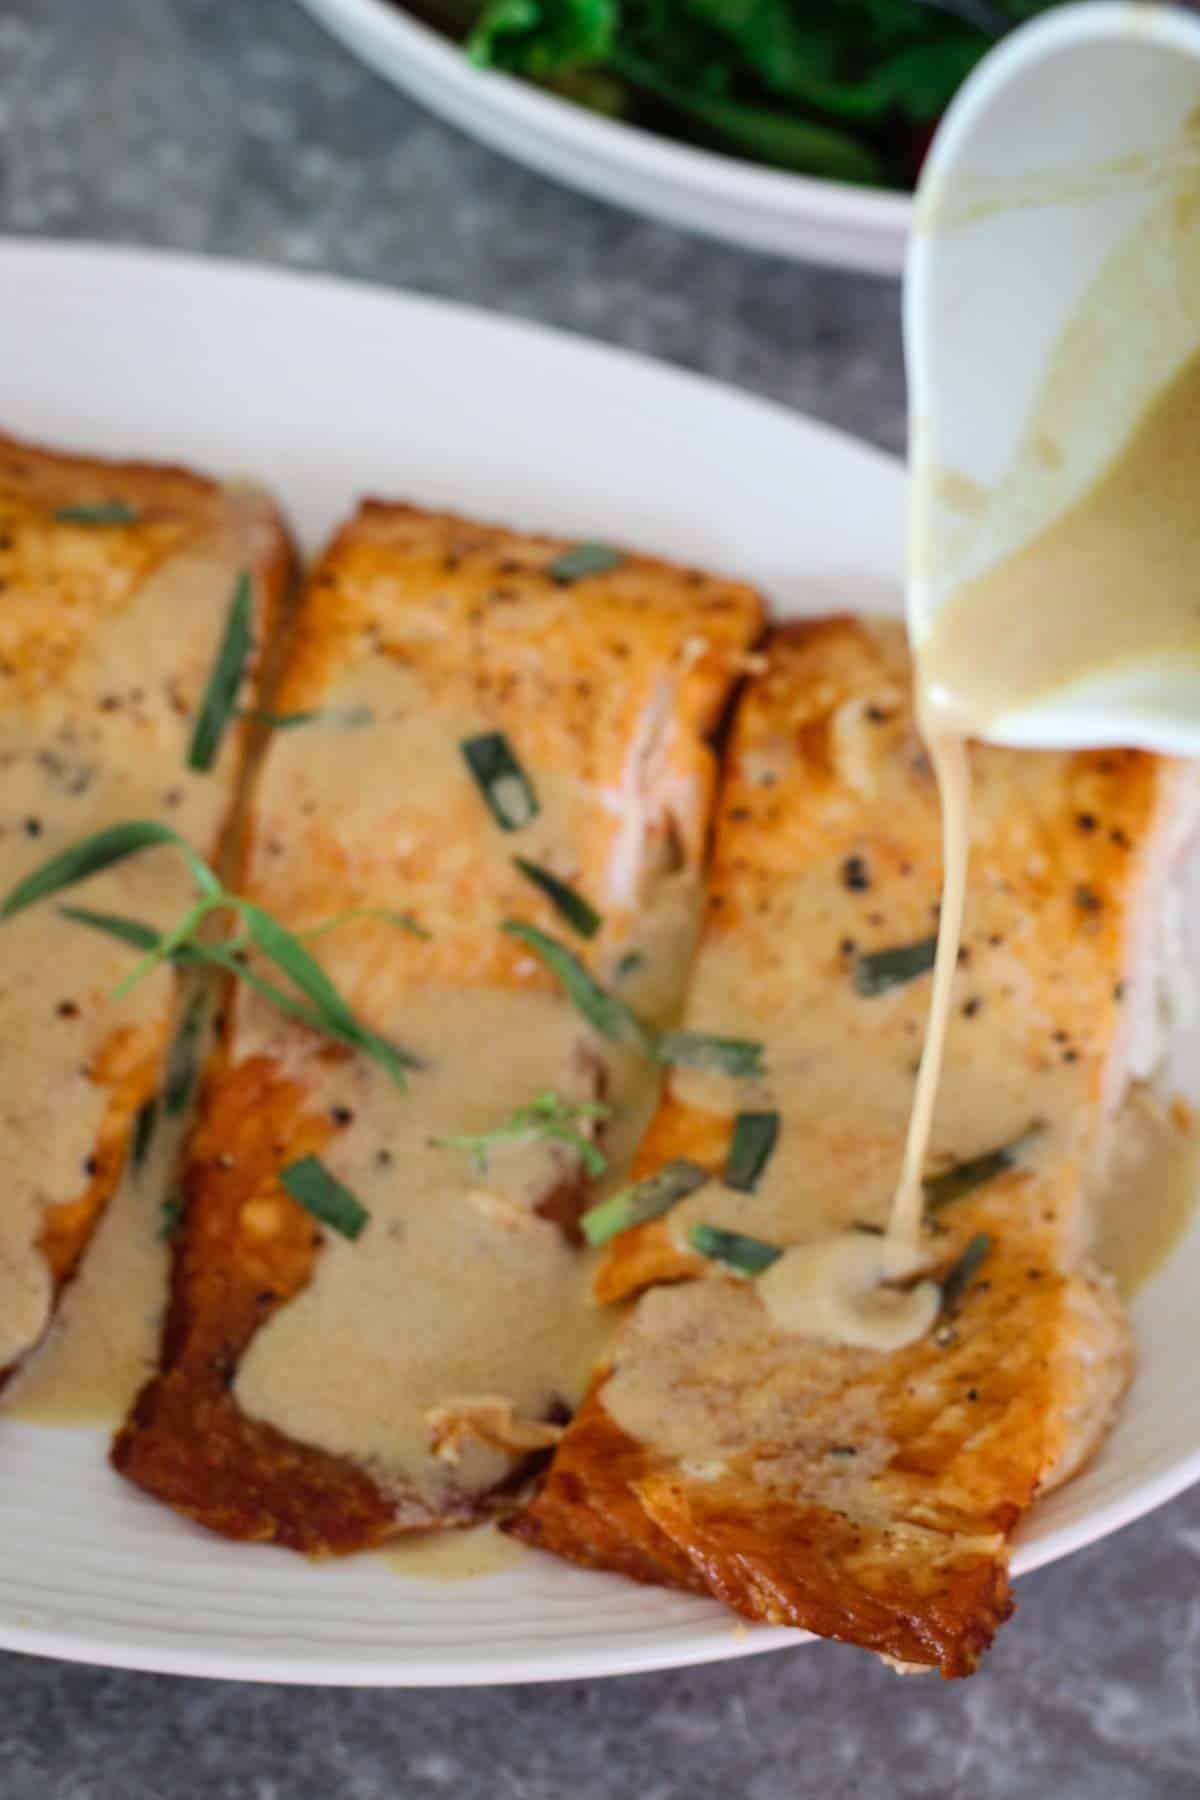 Pouring Dijon, Tarragon Sauce over salmon, Picture shows a cup pouring the sauce over cooked salmon.